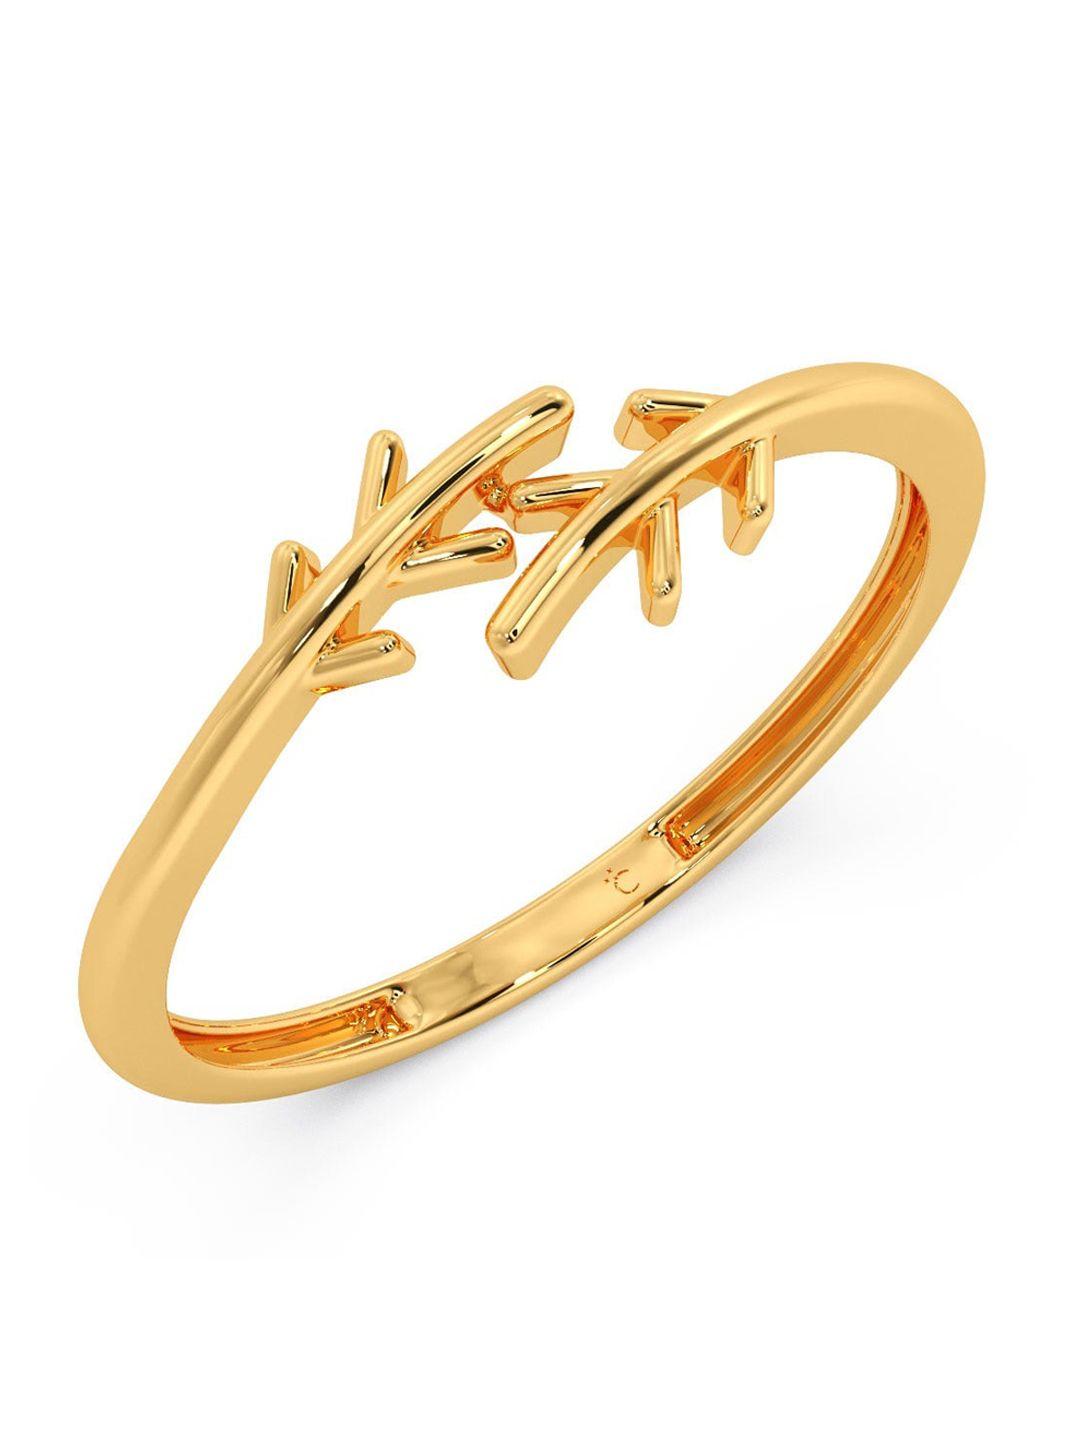 candere-a-kalyan-jewellers-company-18kt-gold-ring-0.69gm